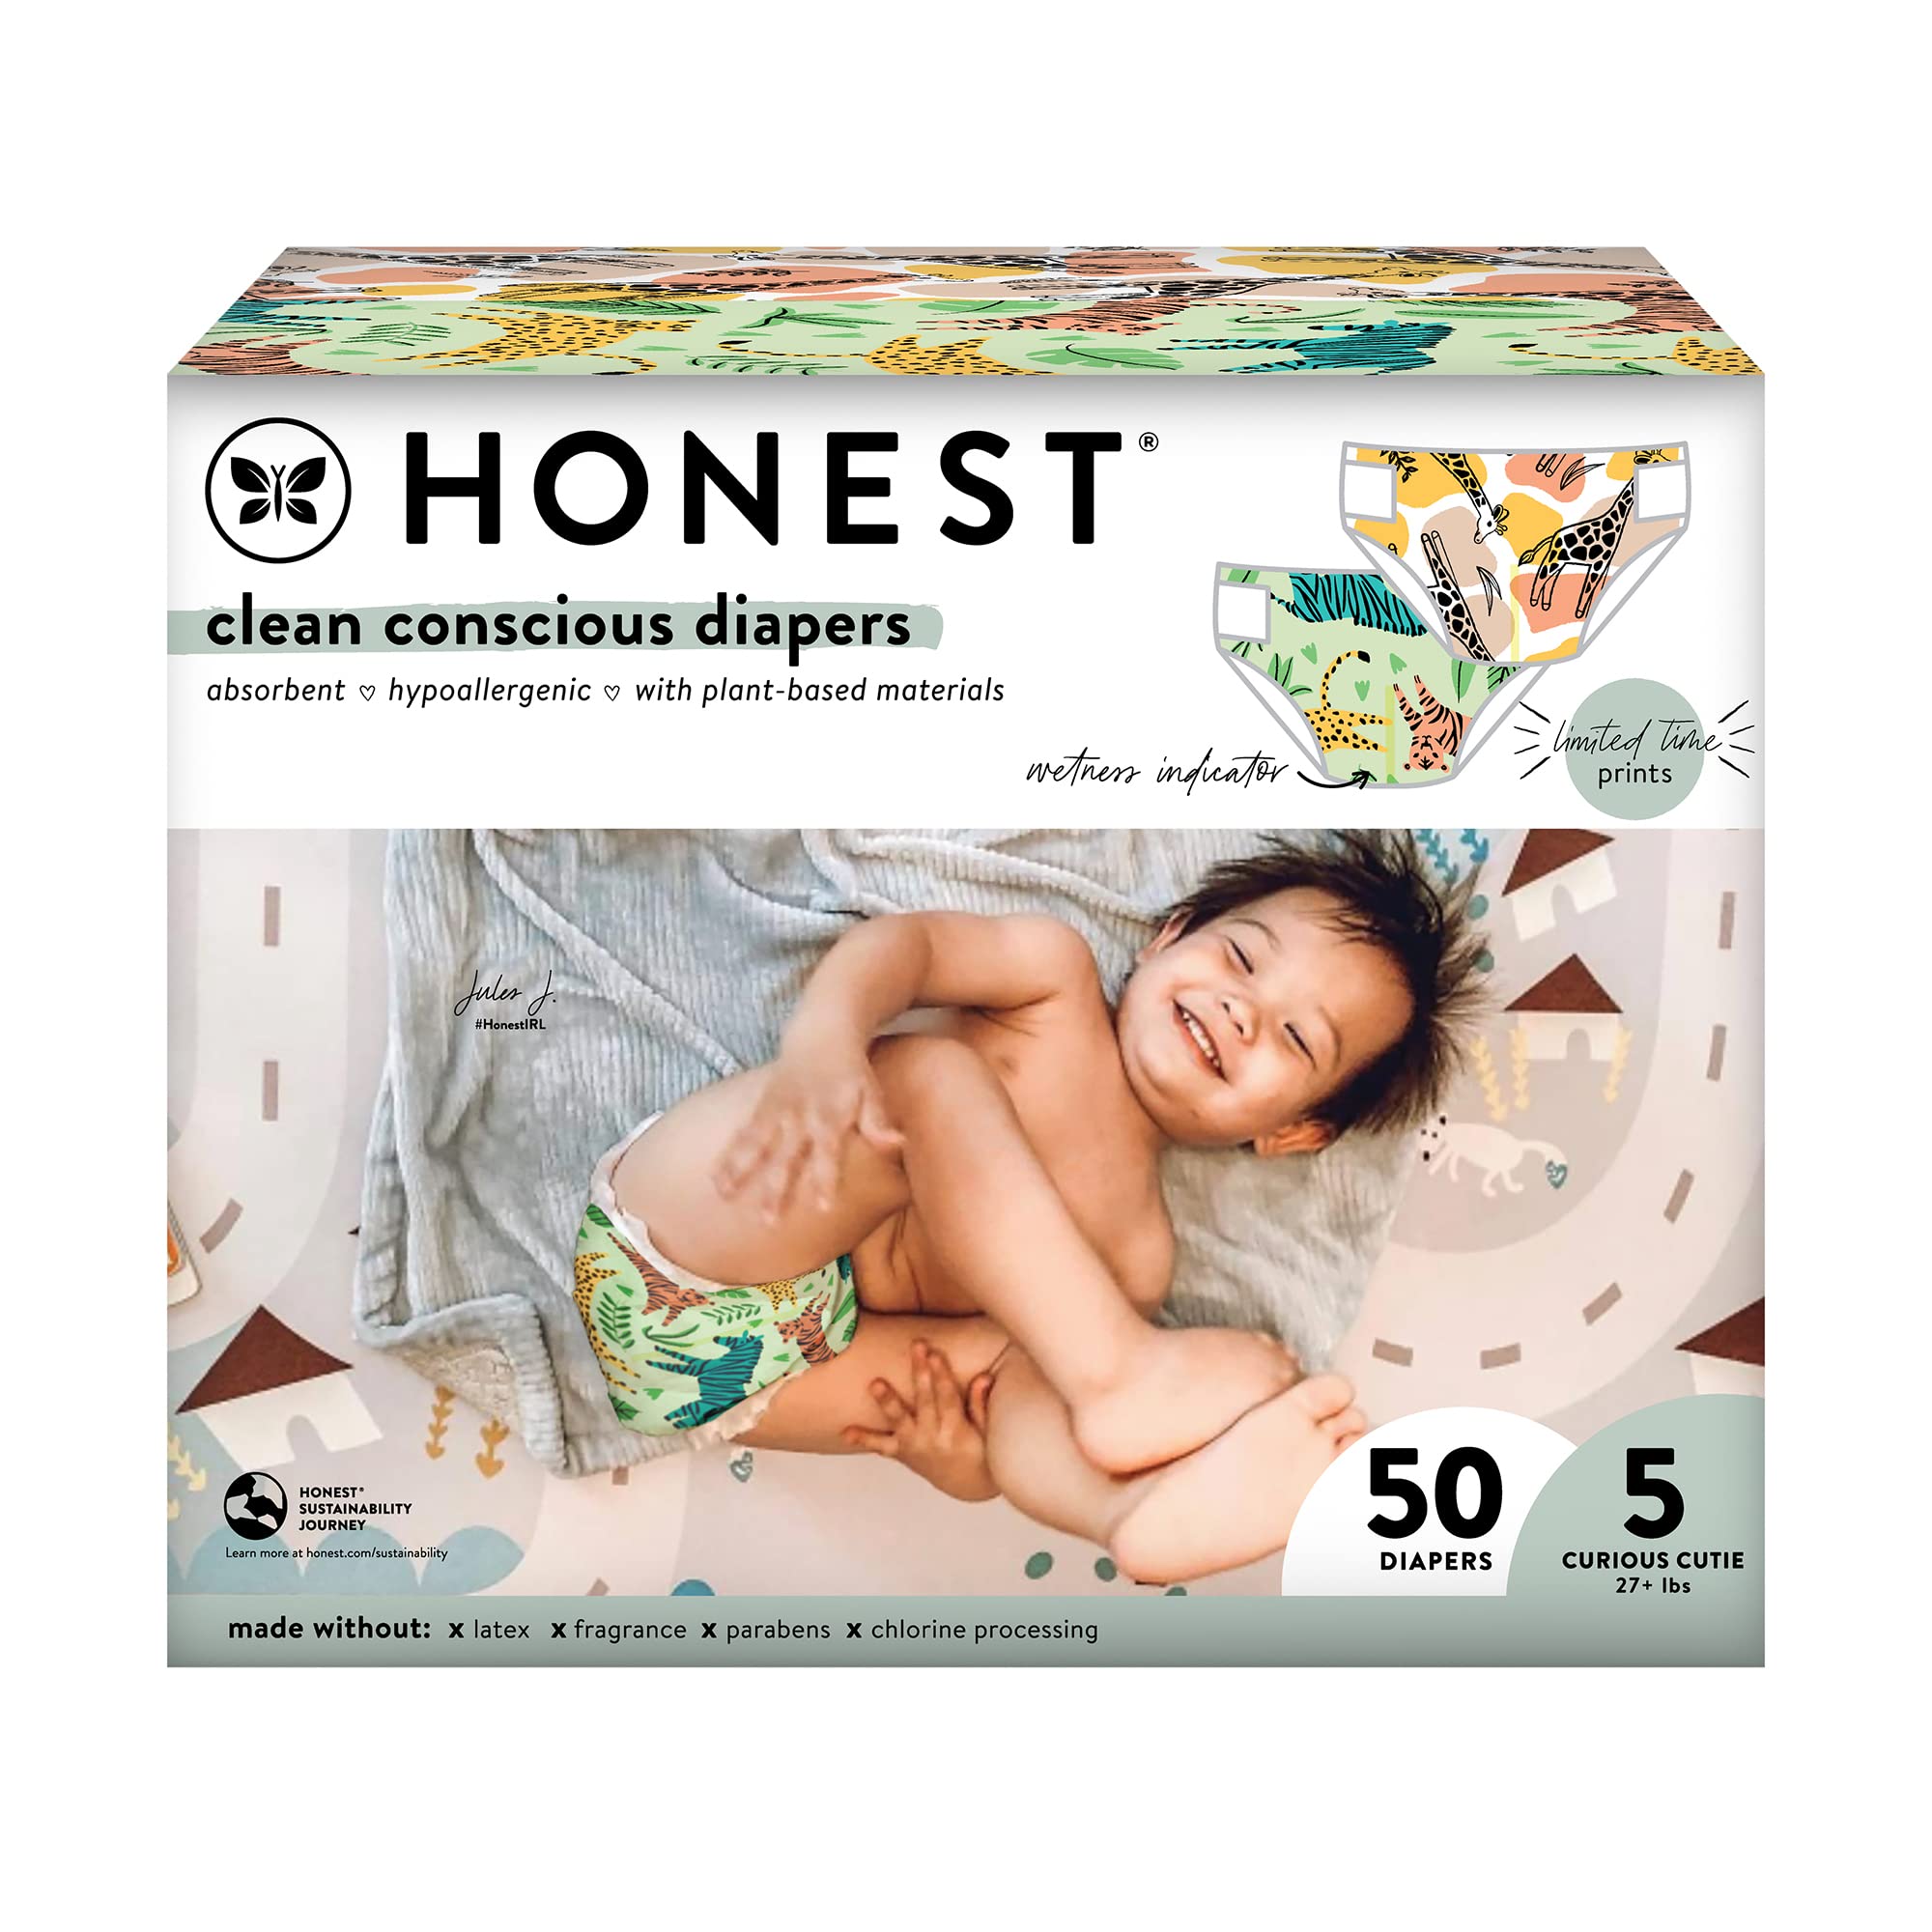 The Honest Company Clean Conscious Diapers | Plant-Based, Sustainable | Stripe Safari & Seeing Spots | Club Box, Size 5 (27+ lbs), 50 Count